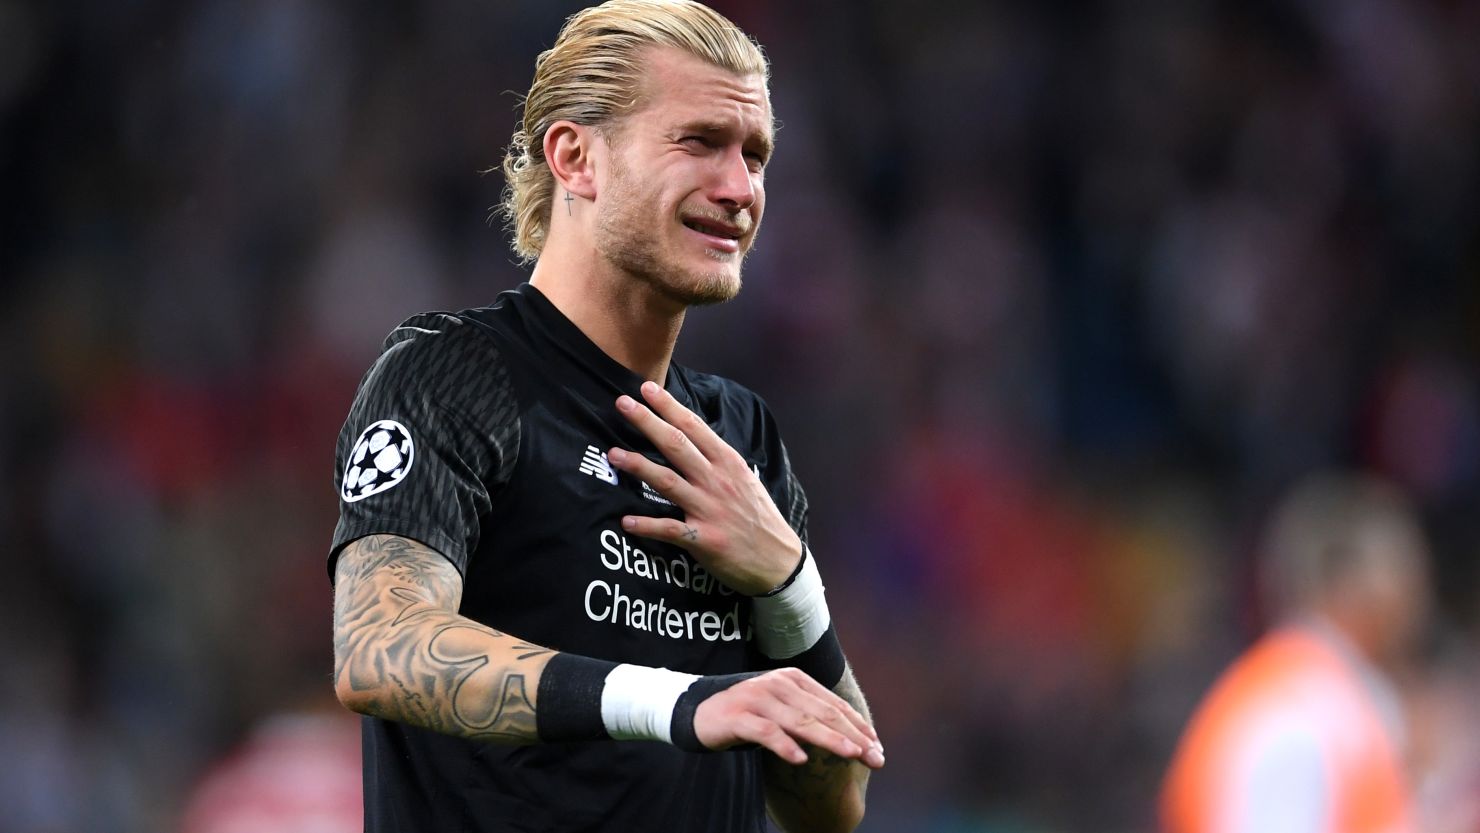 Karius has said he is "infinitely sorry" for his mistakes.